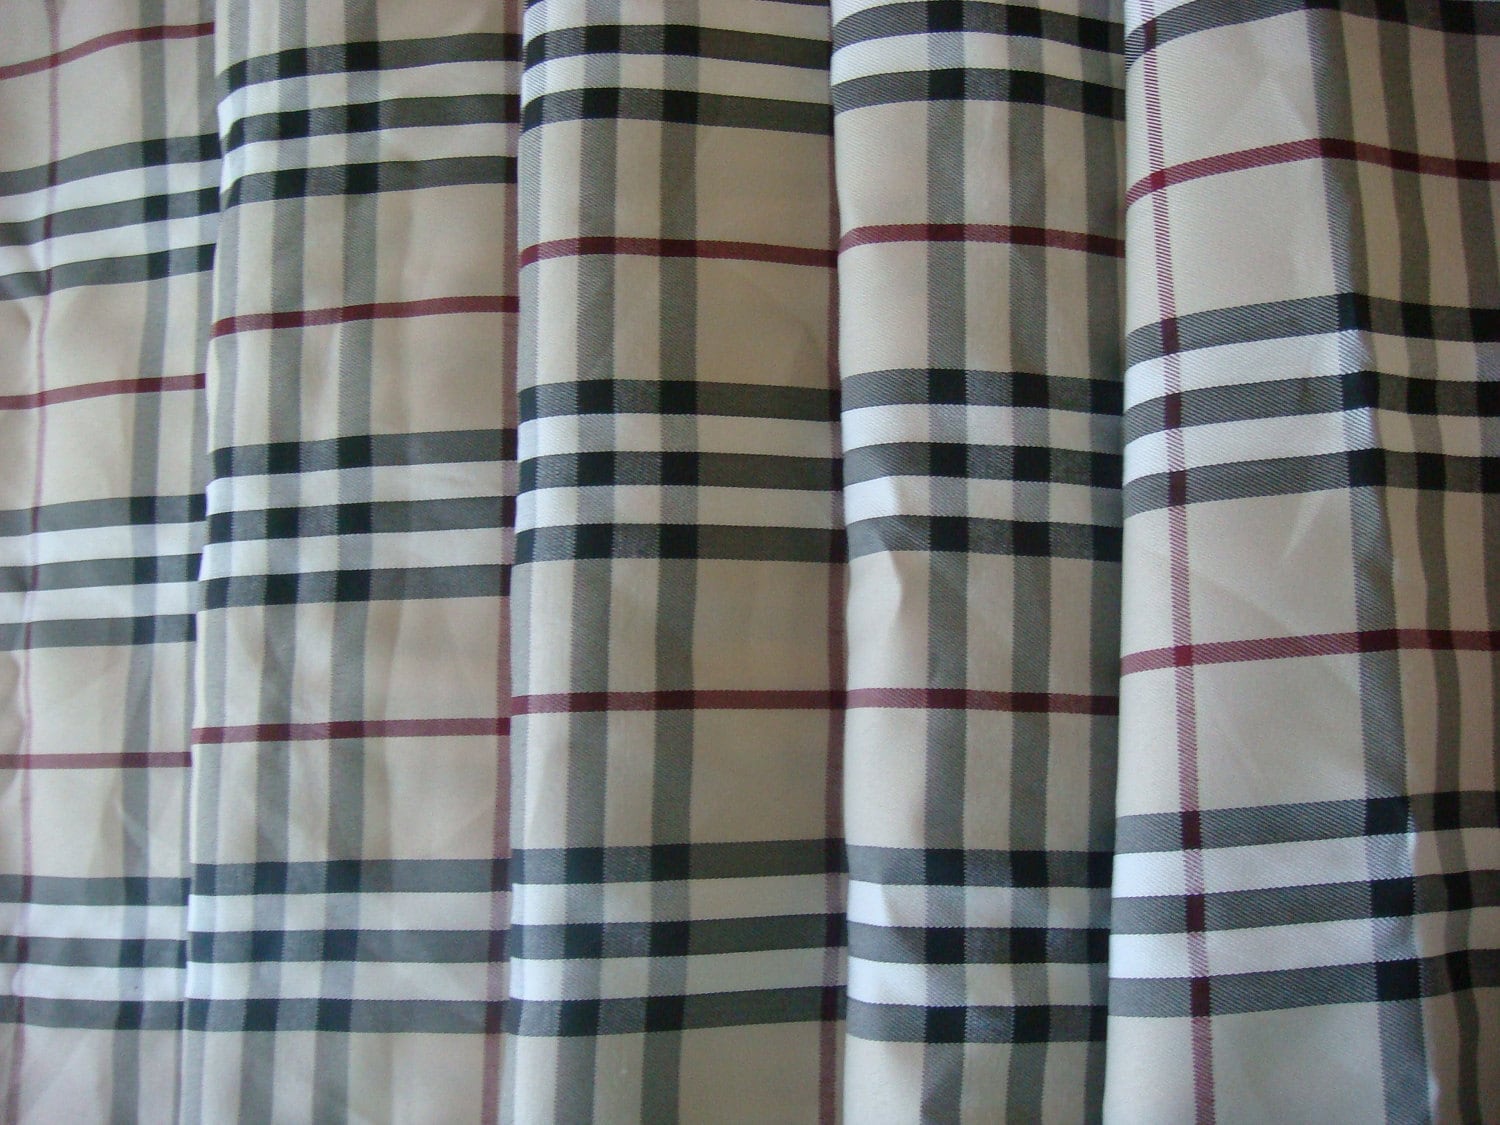 Burberry-Style Plaid Fabric by AlorasAdorables on Etsy